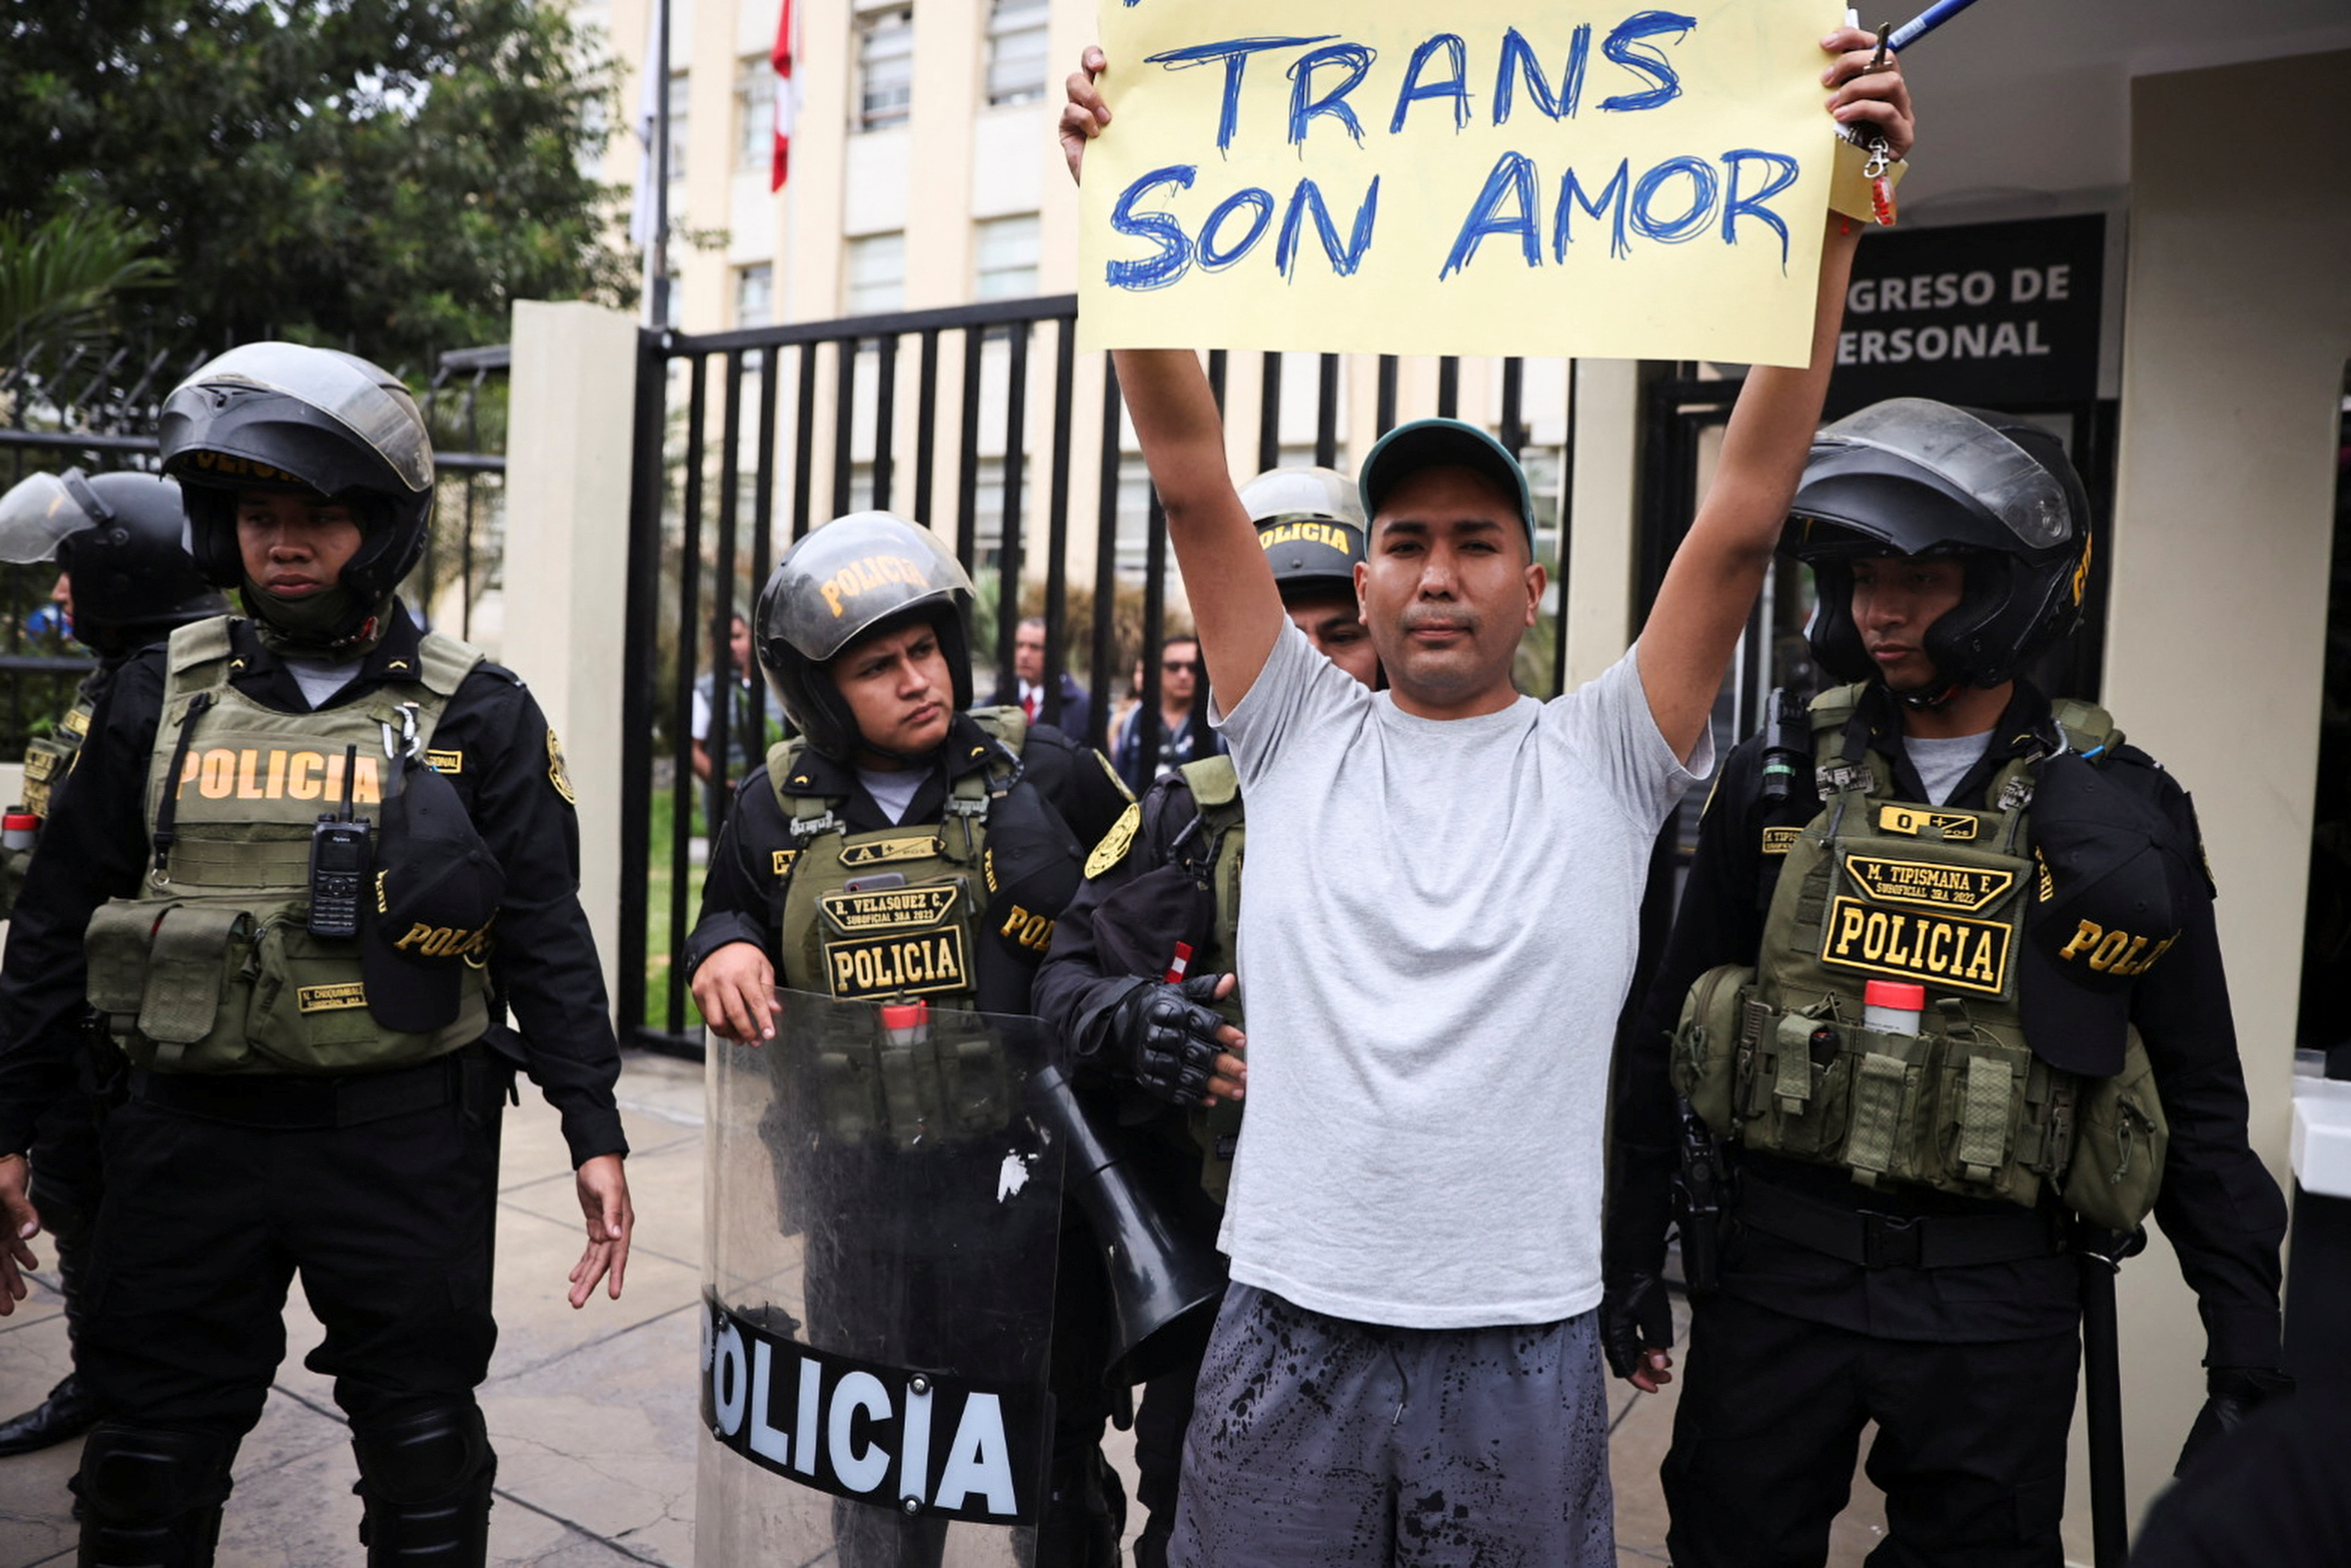 Protest by LGBT community groups in Lima